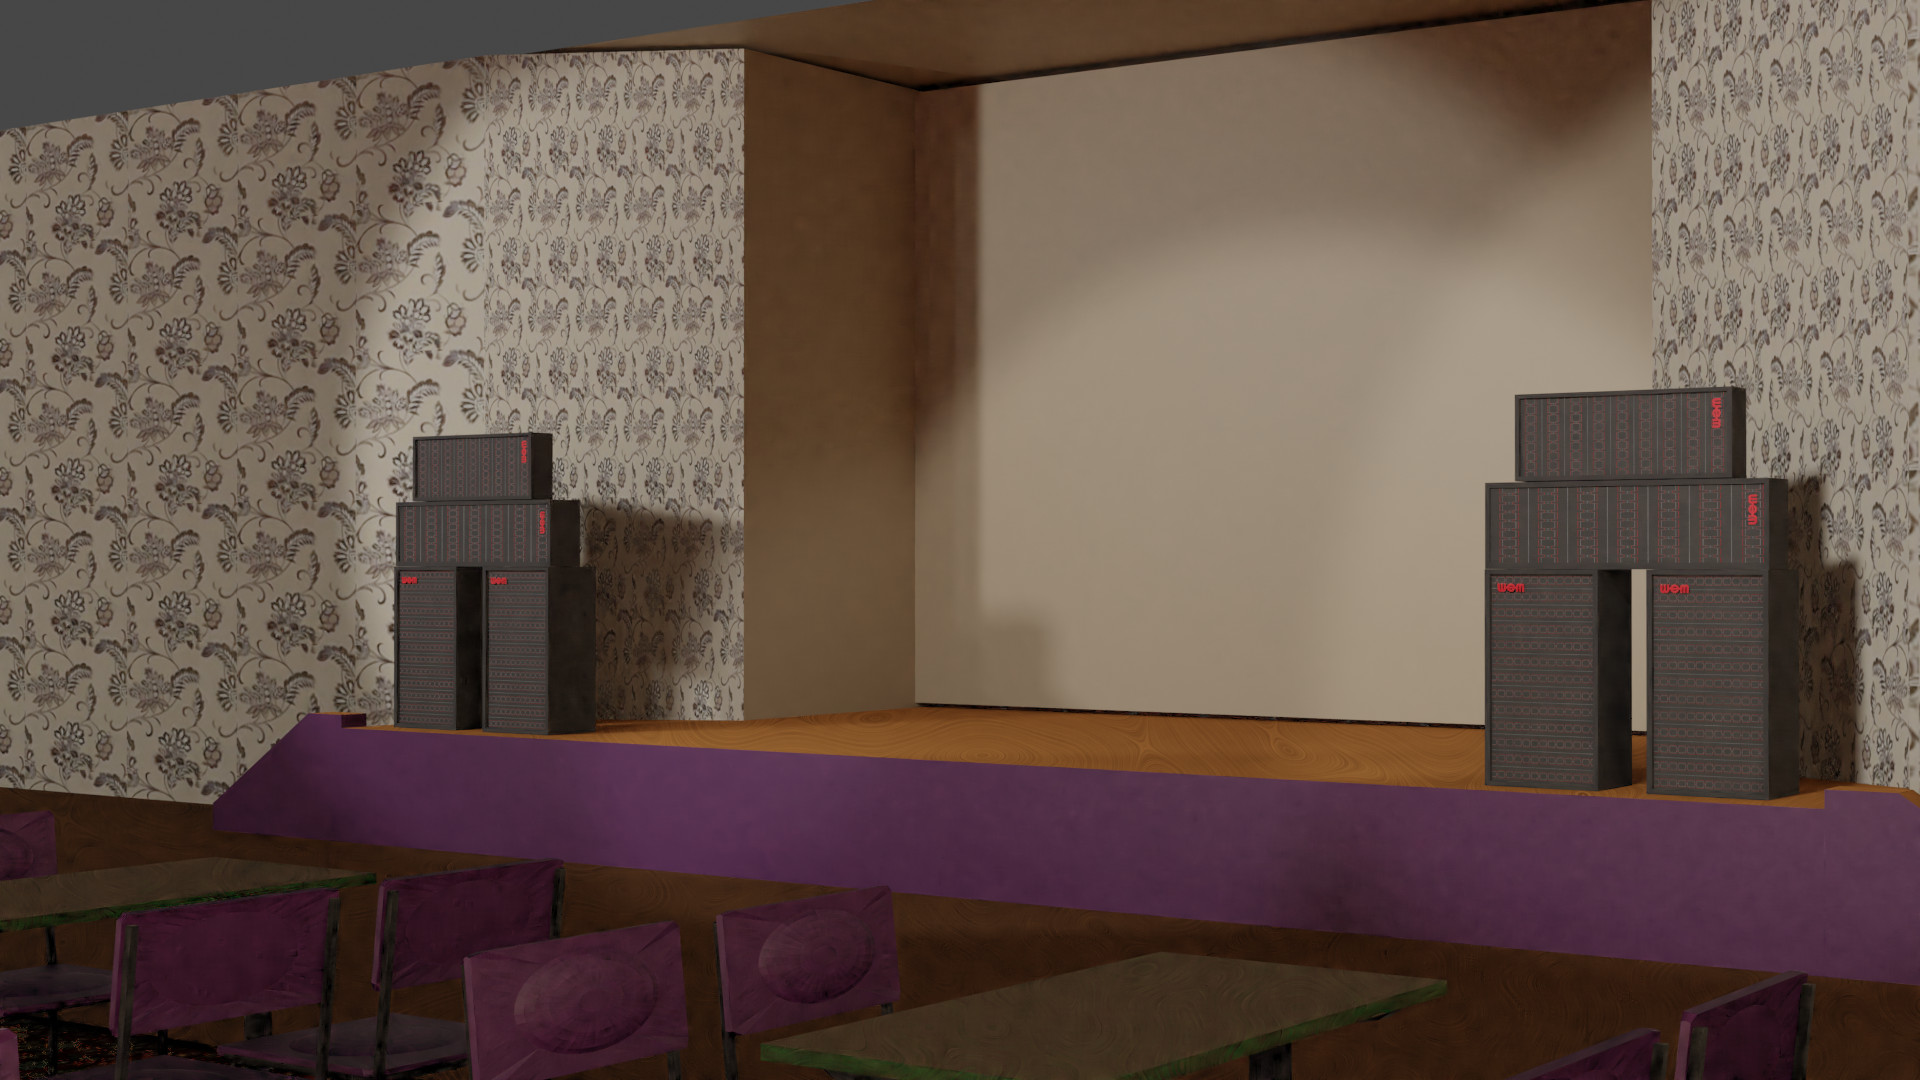 A Blender simulation of the WEM PA loudspeaker cabinets on stage in the 3D model of a working men's club.